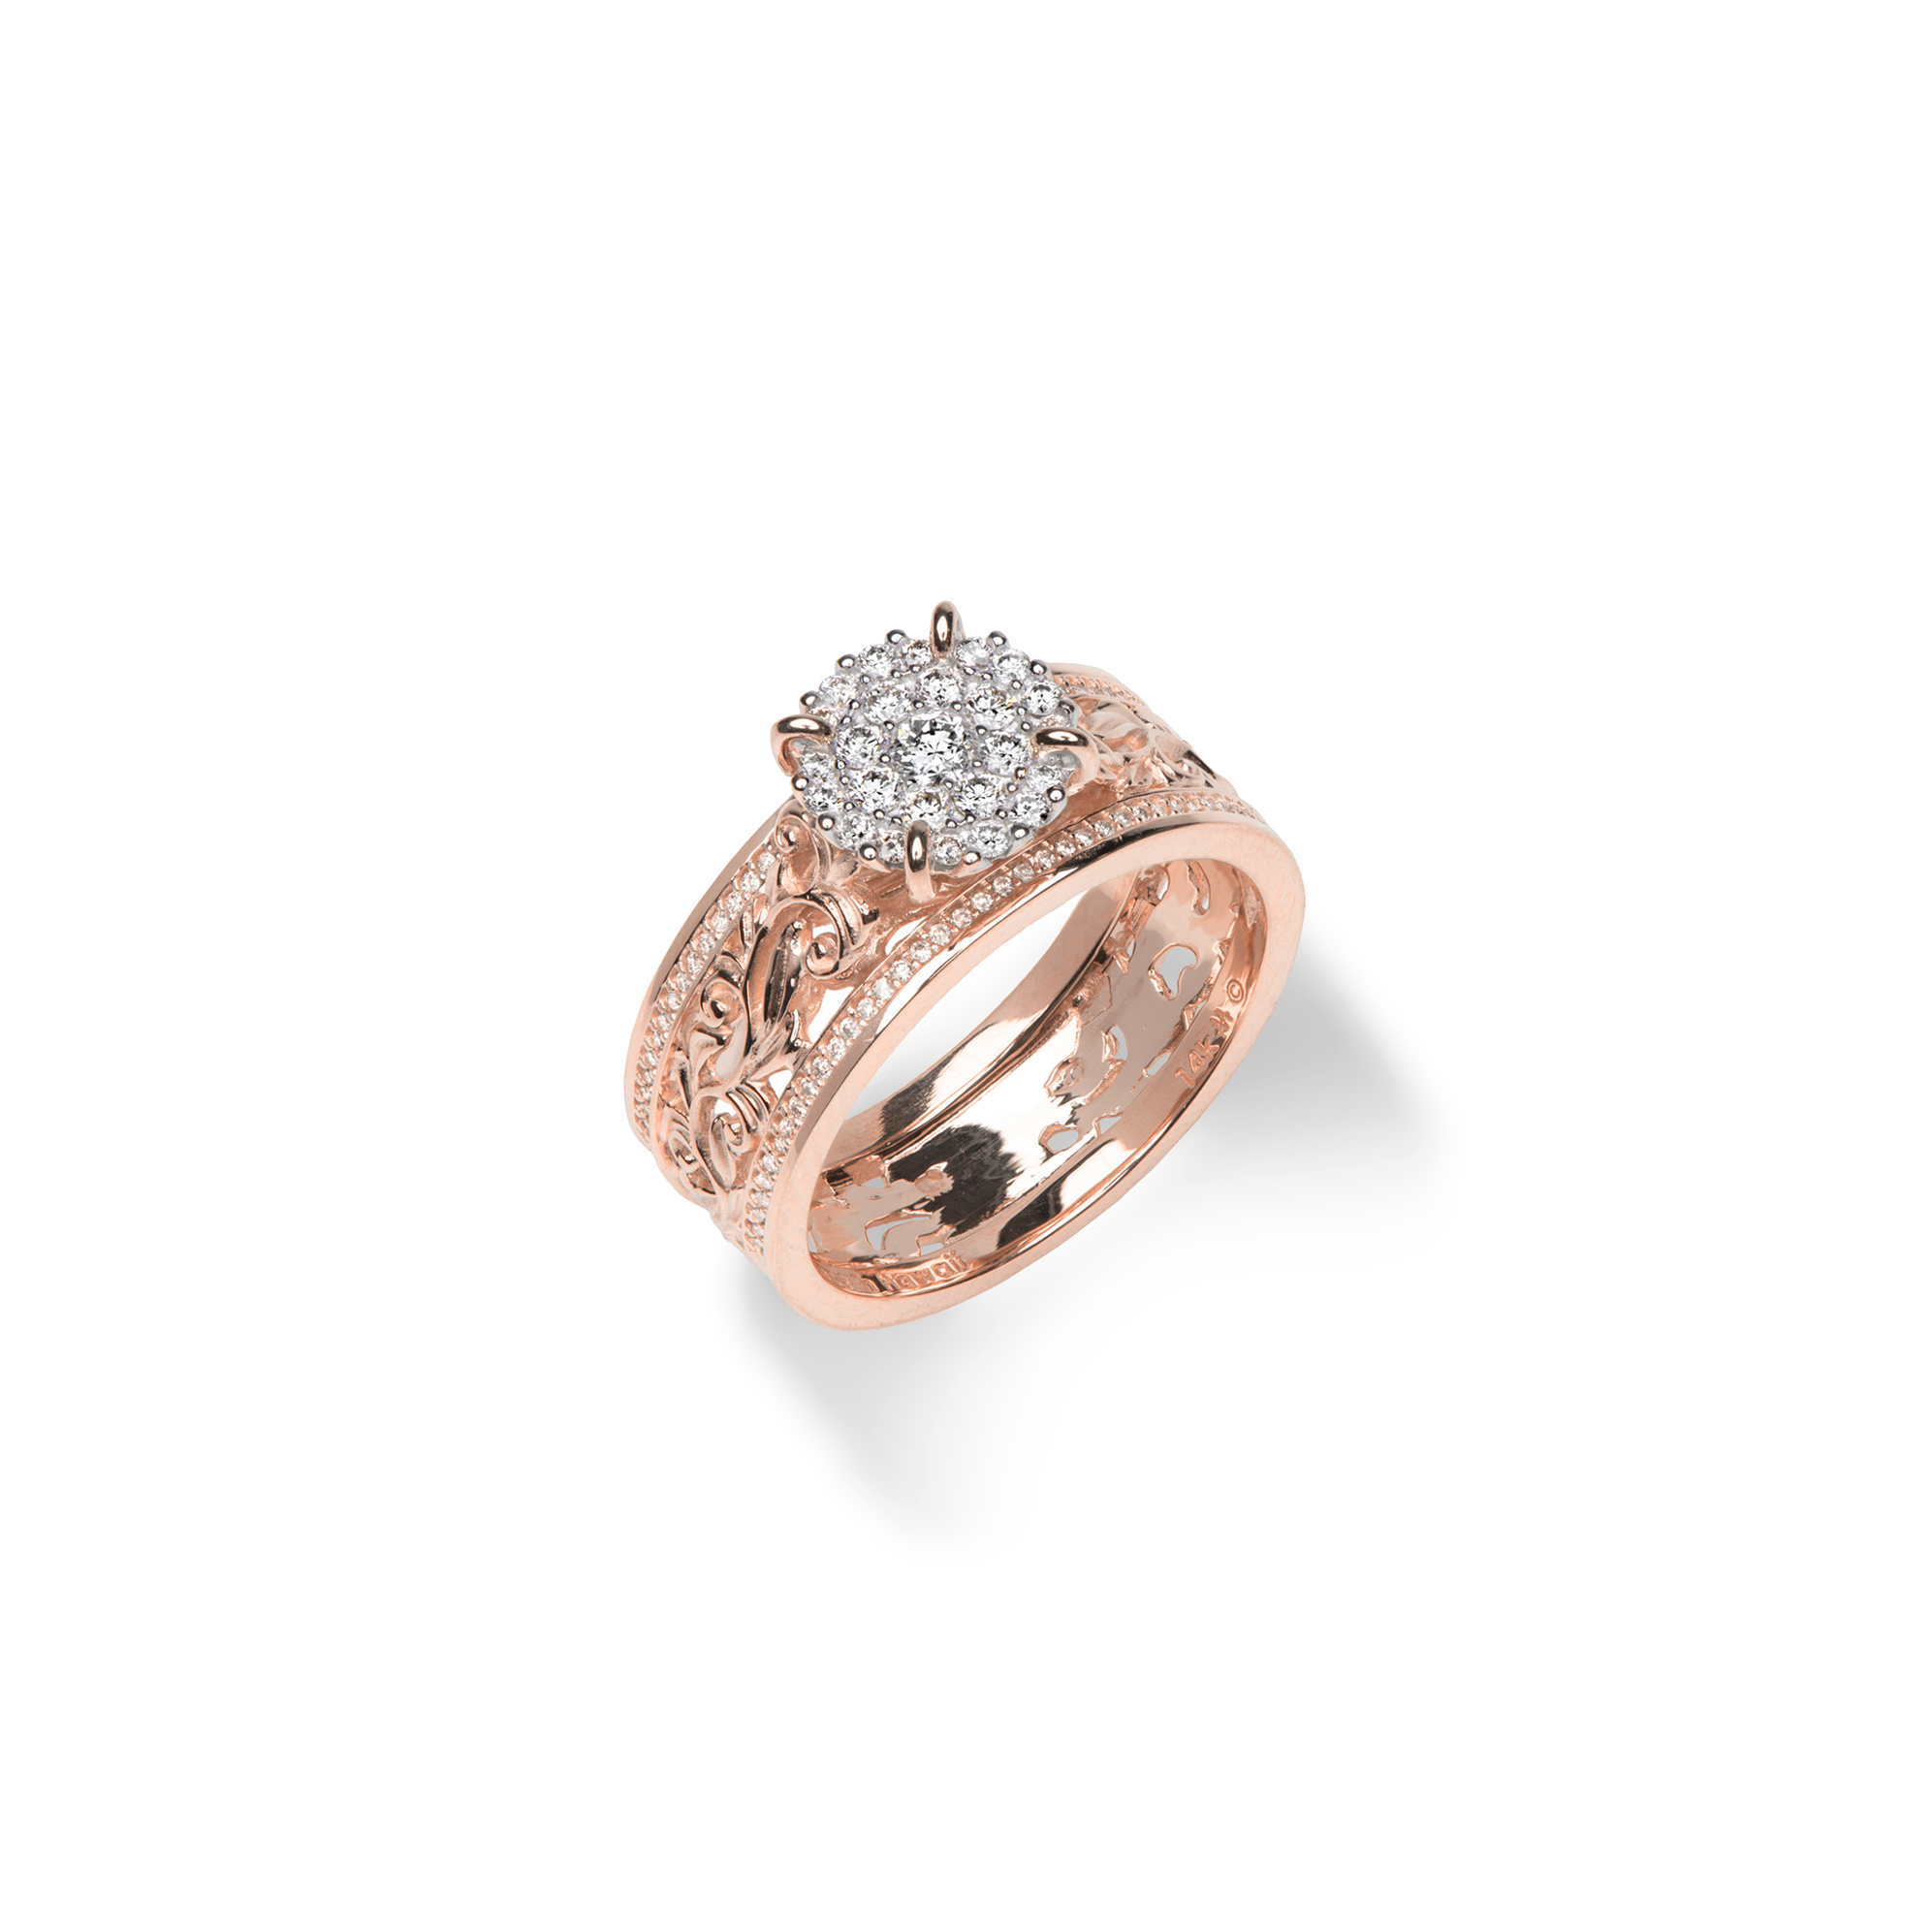 Living Heirloom Engagement Ring in Rose Gold with Diamonds - 7mm